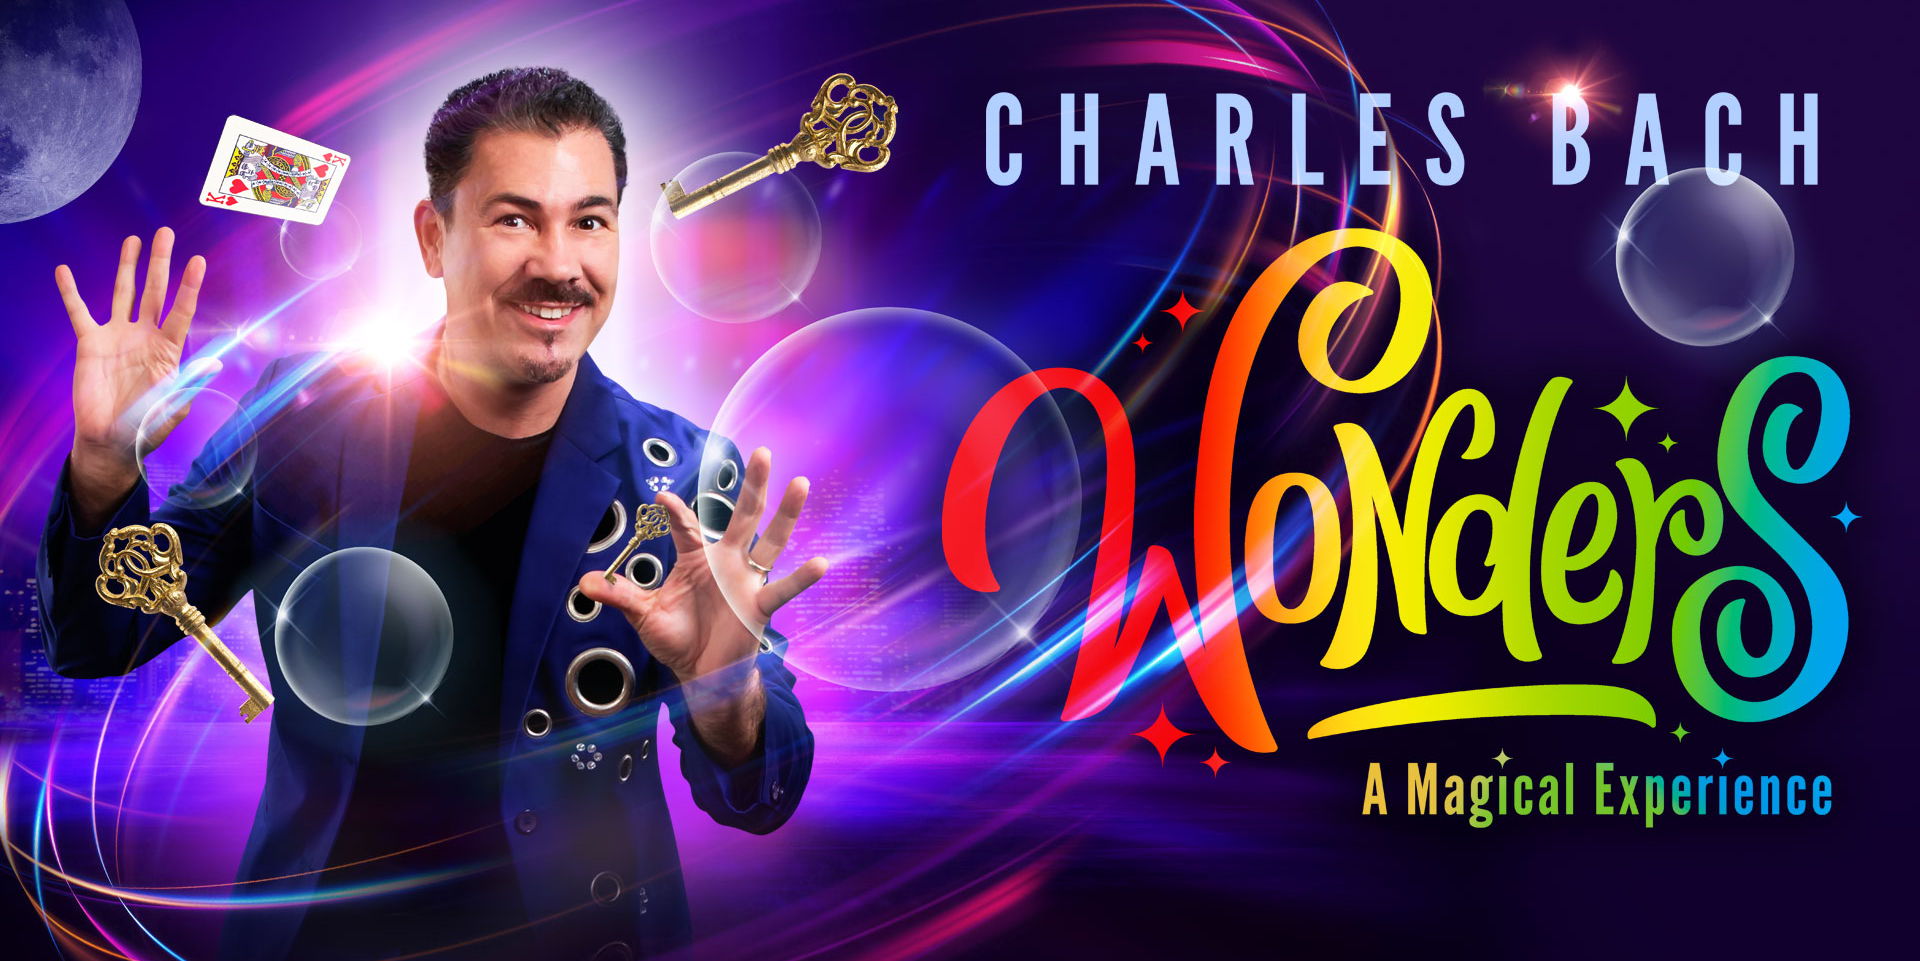 Charles Bach Wonders!  Magic & Illusion Show promotional image